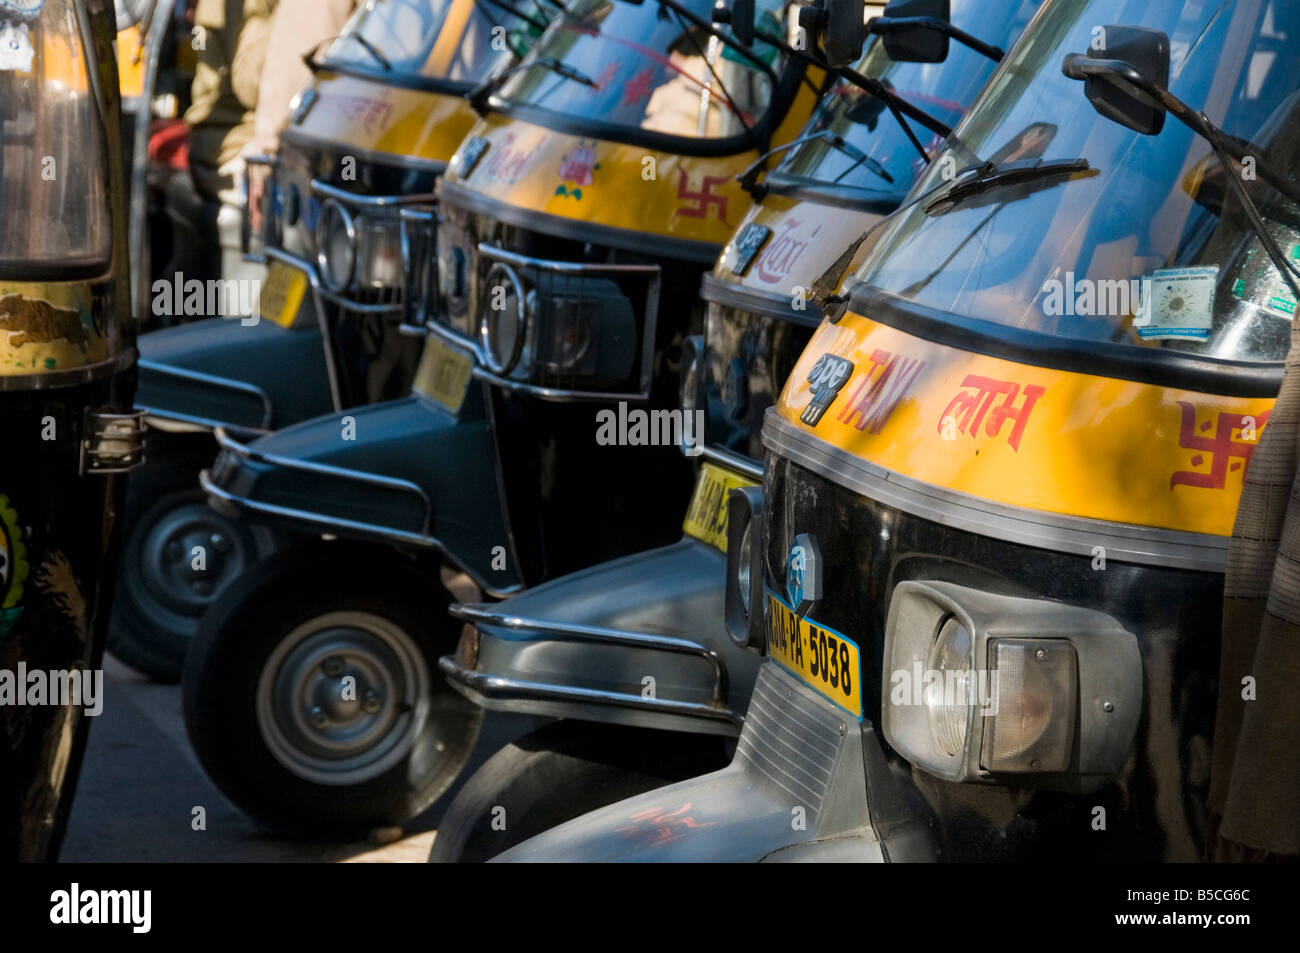 Row of traditional Indian rickshaw taxis Stock Photo